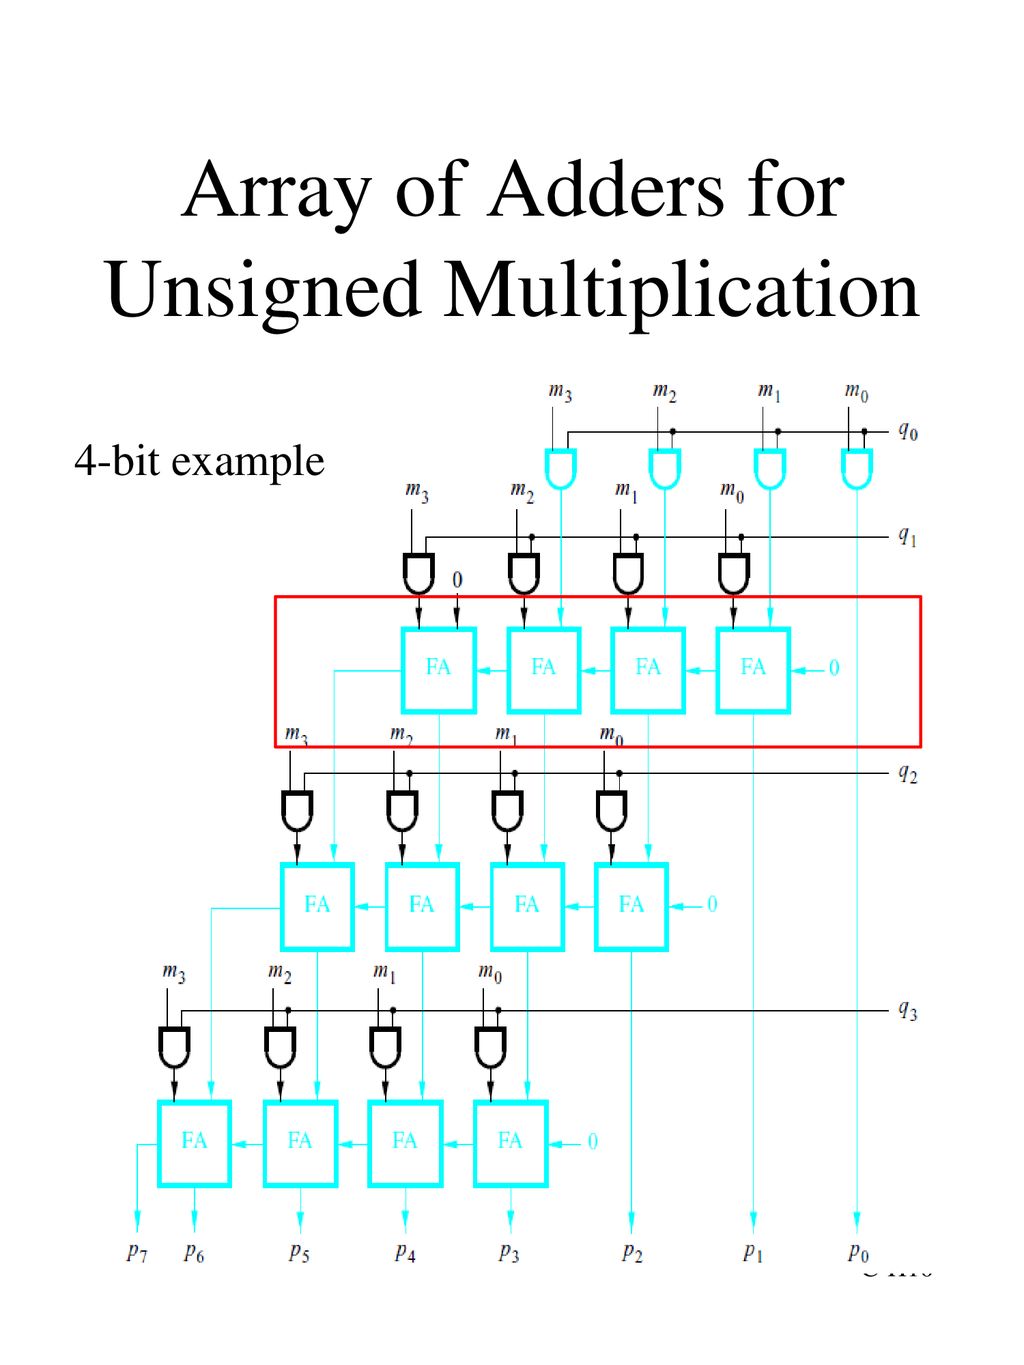 Array of Adders for Unsigned Multiplication